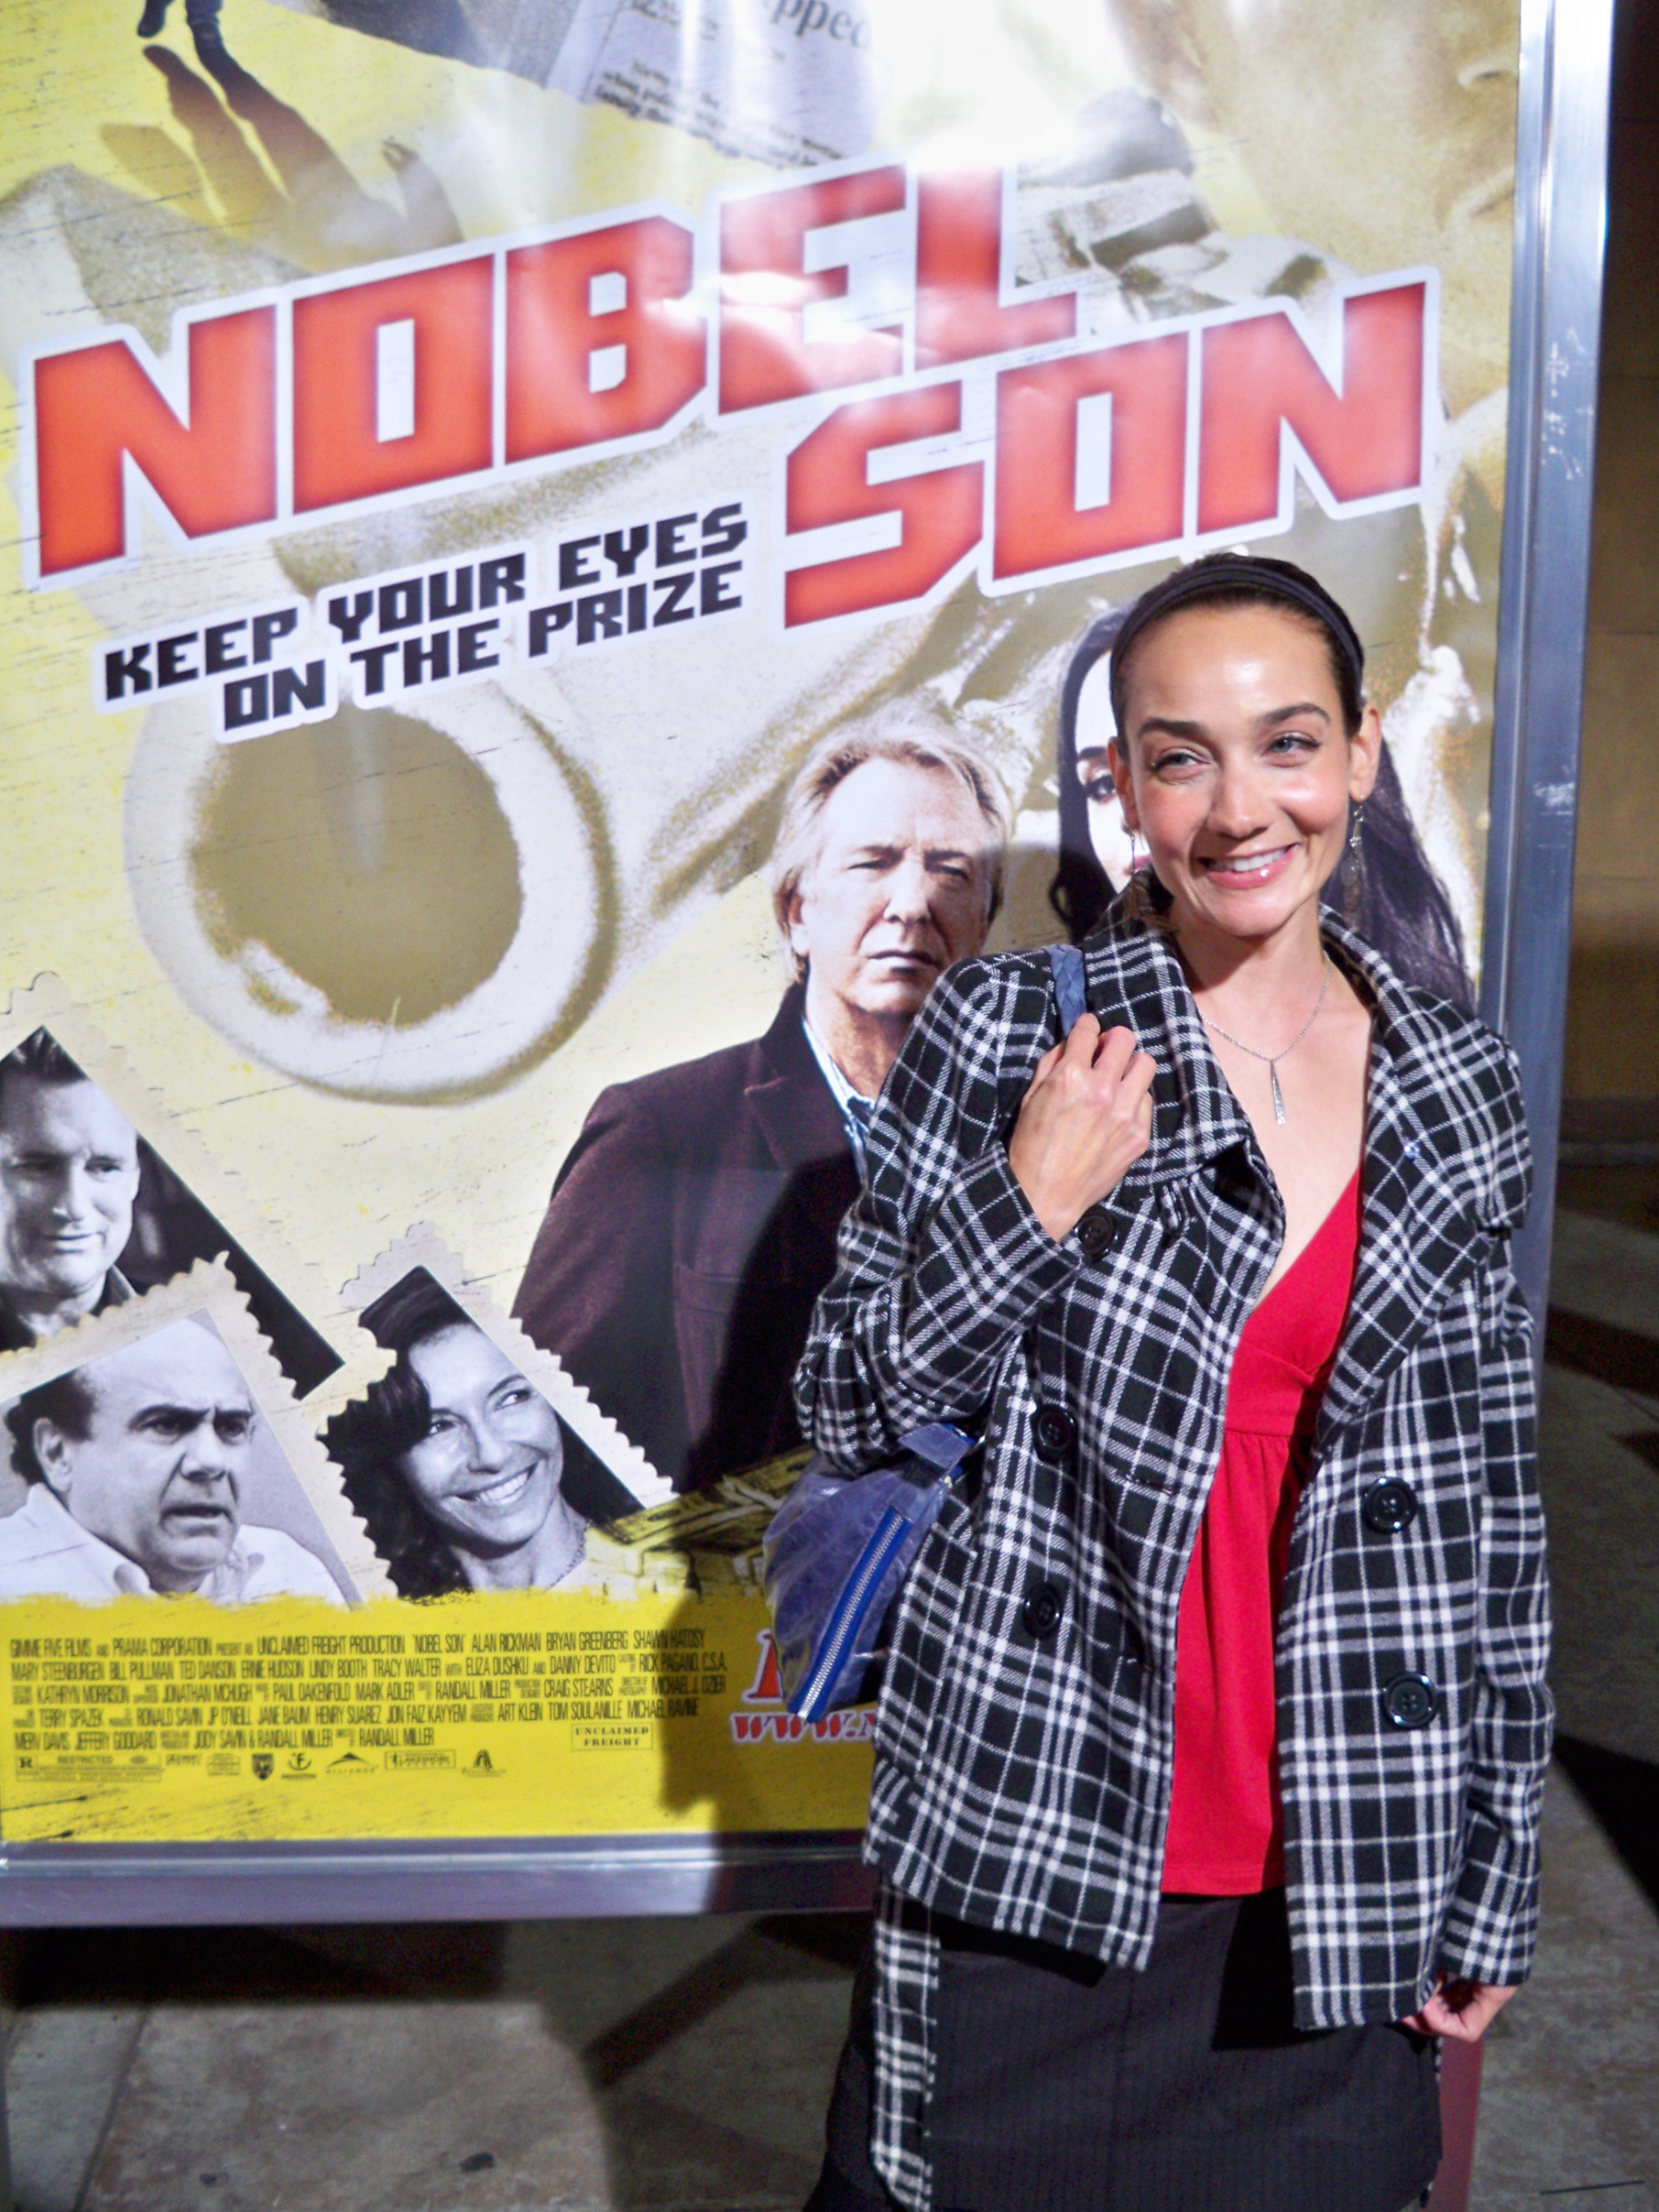 Dawn Balkin on the Red Carpet at the Premiere of Nobel Son.